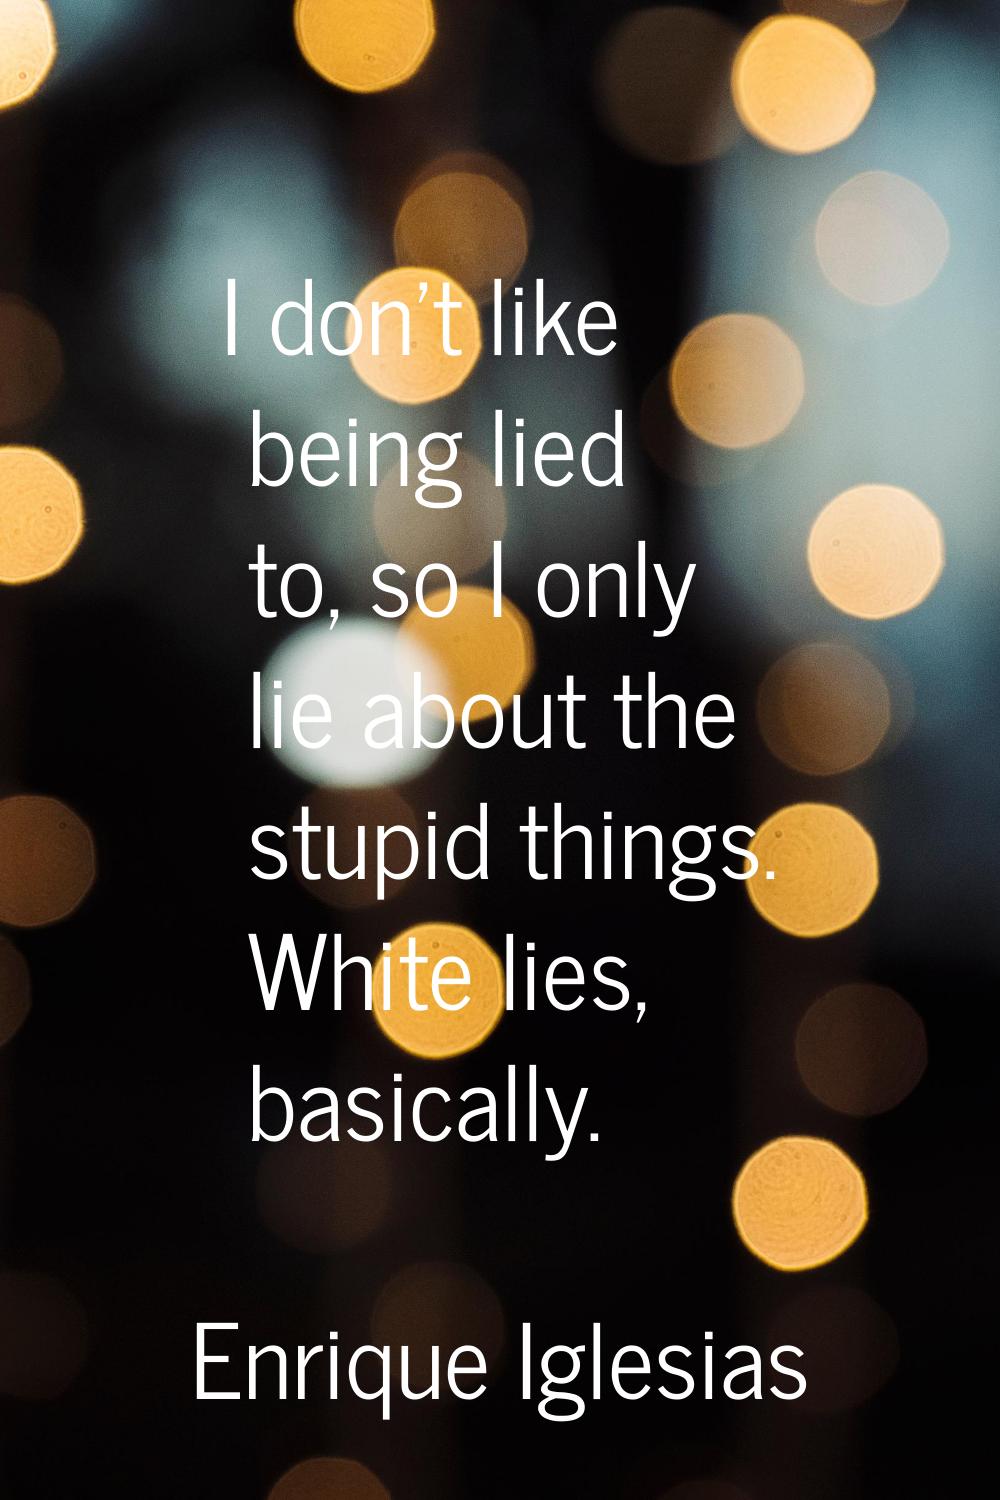 I don't like being lied to, so I only lie about the stupid things. White lies, basically.